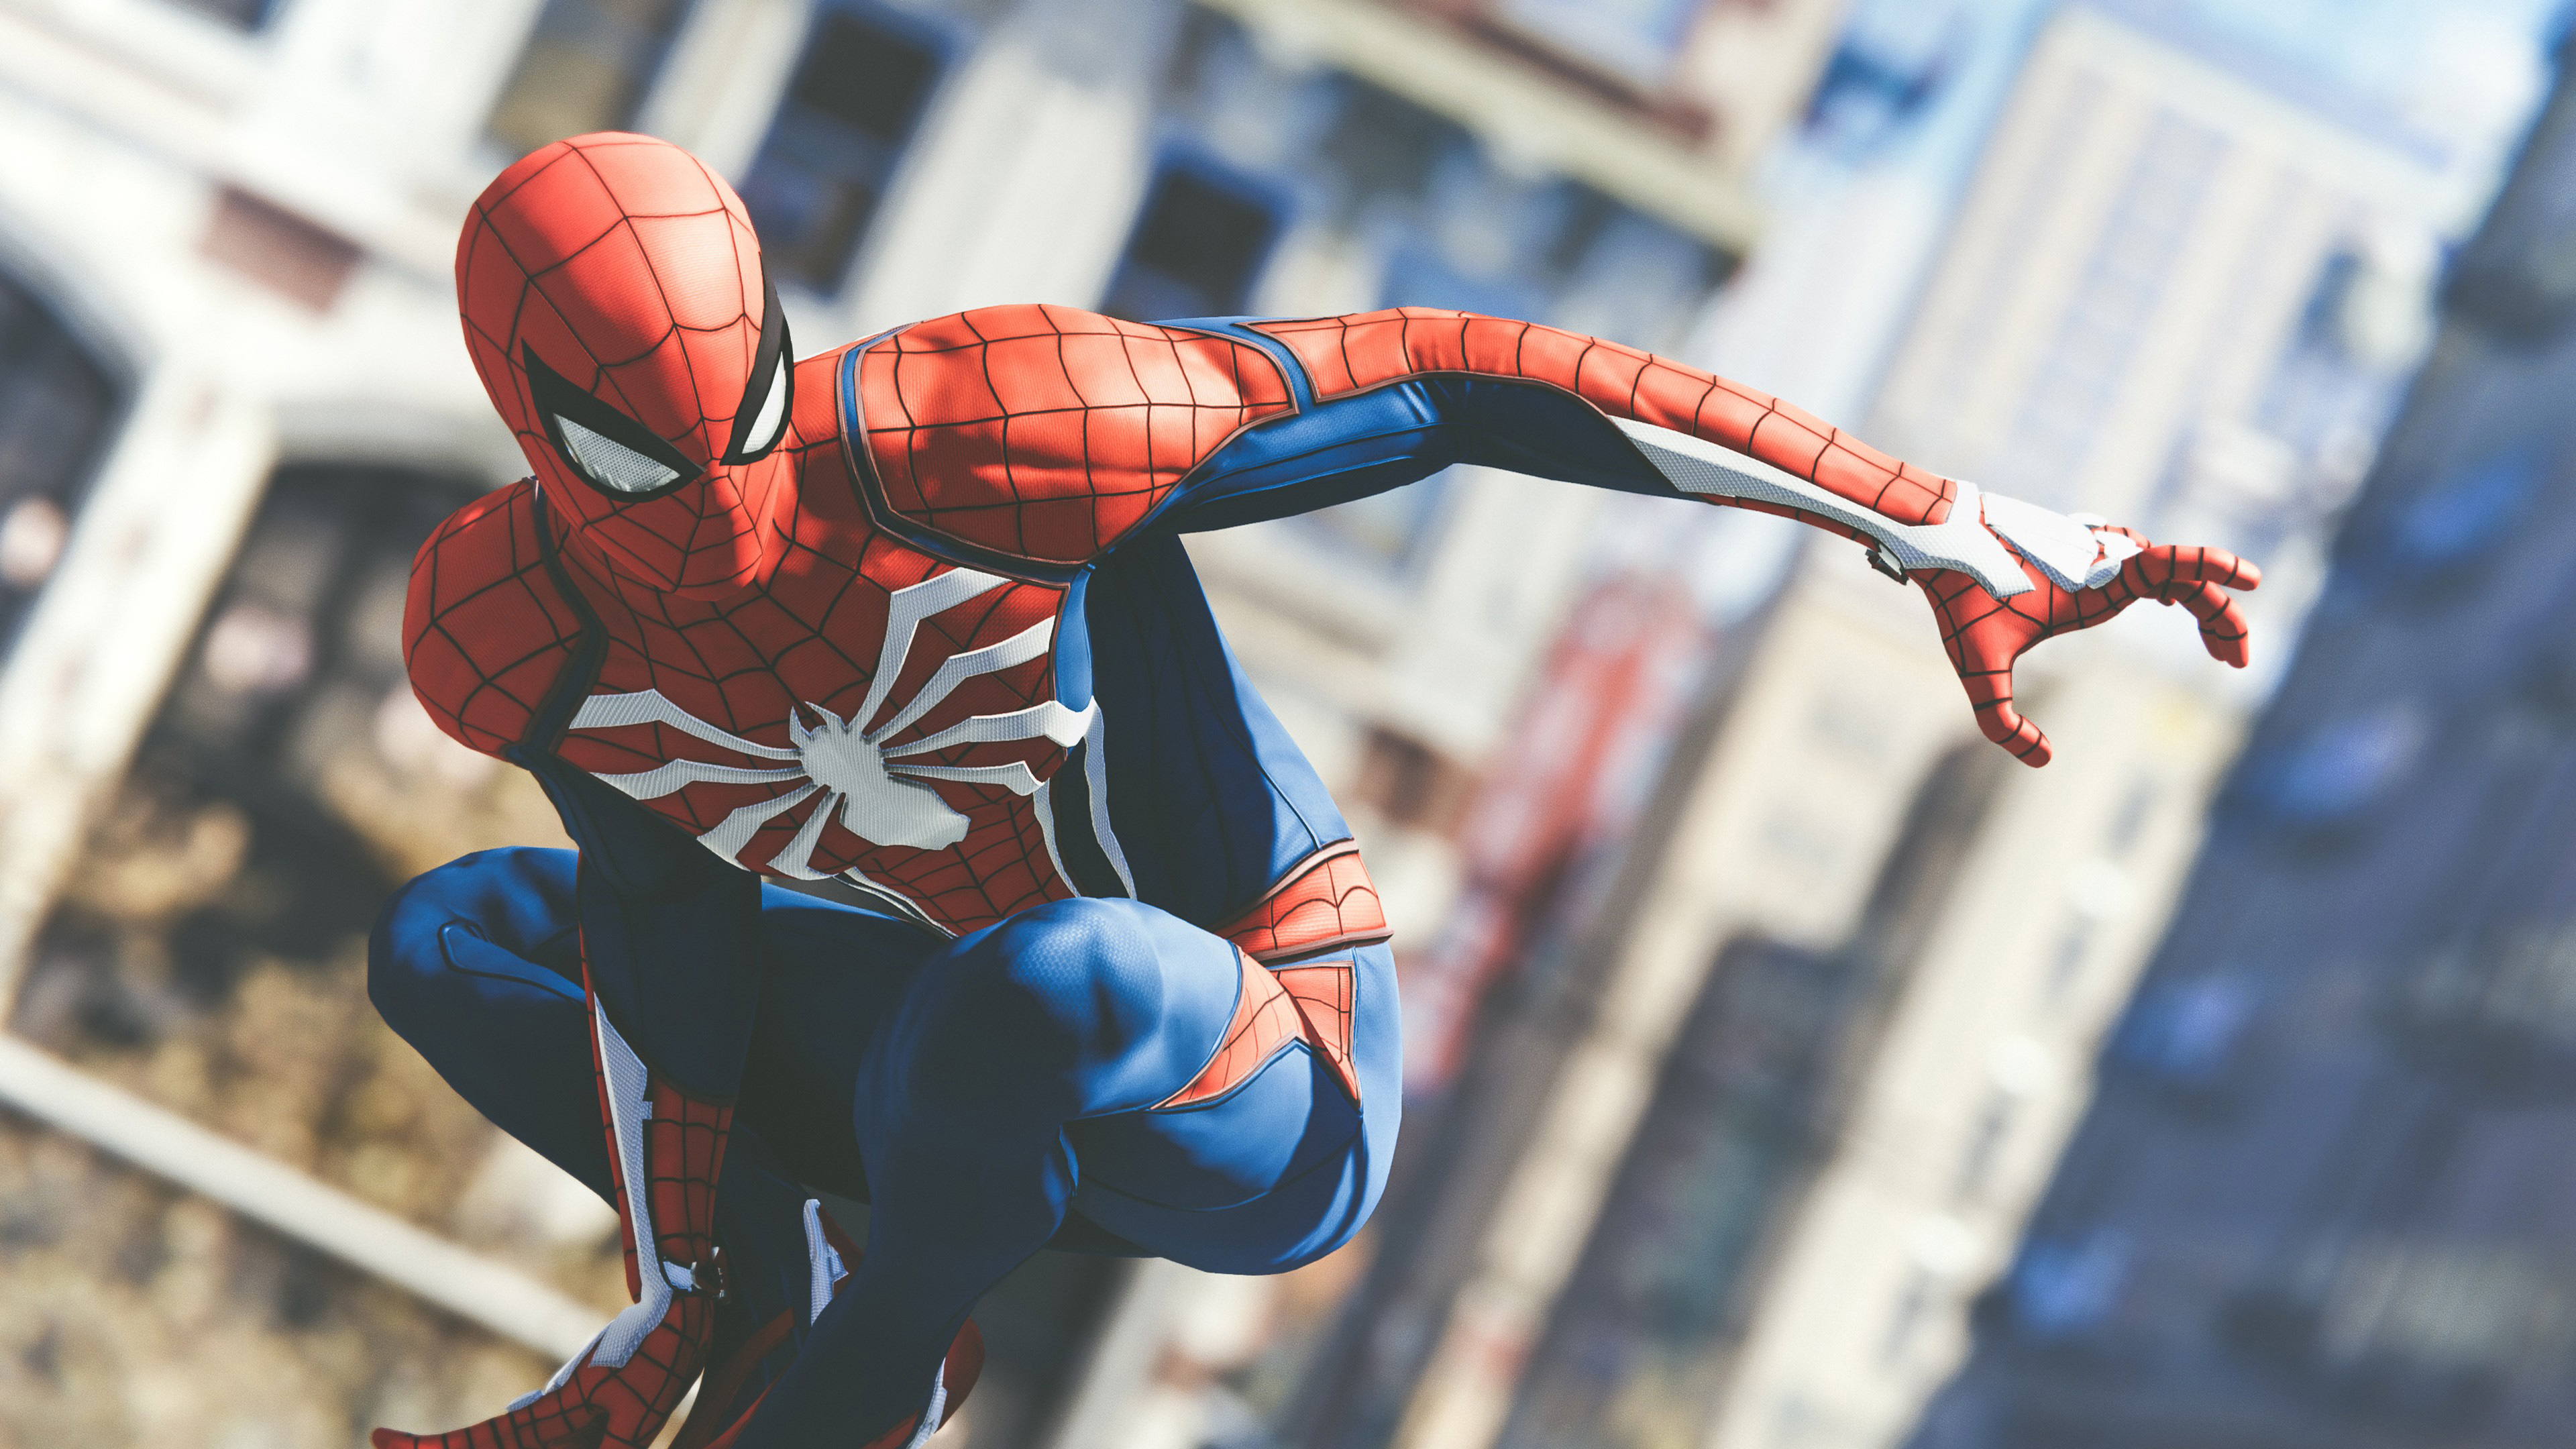 Marvels Spider Man Wallpapers in Ultra HD 4K NuclearCoffee